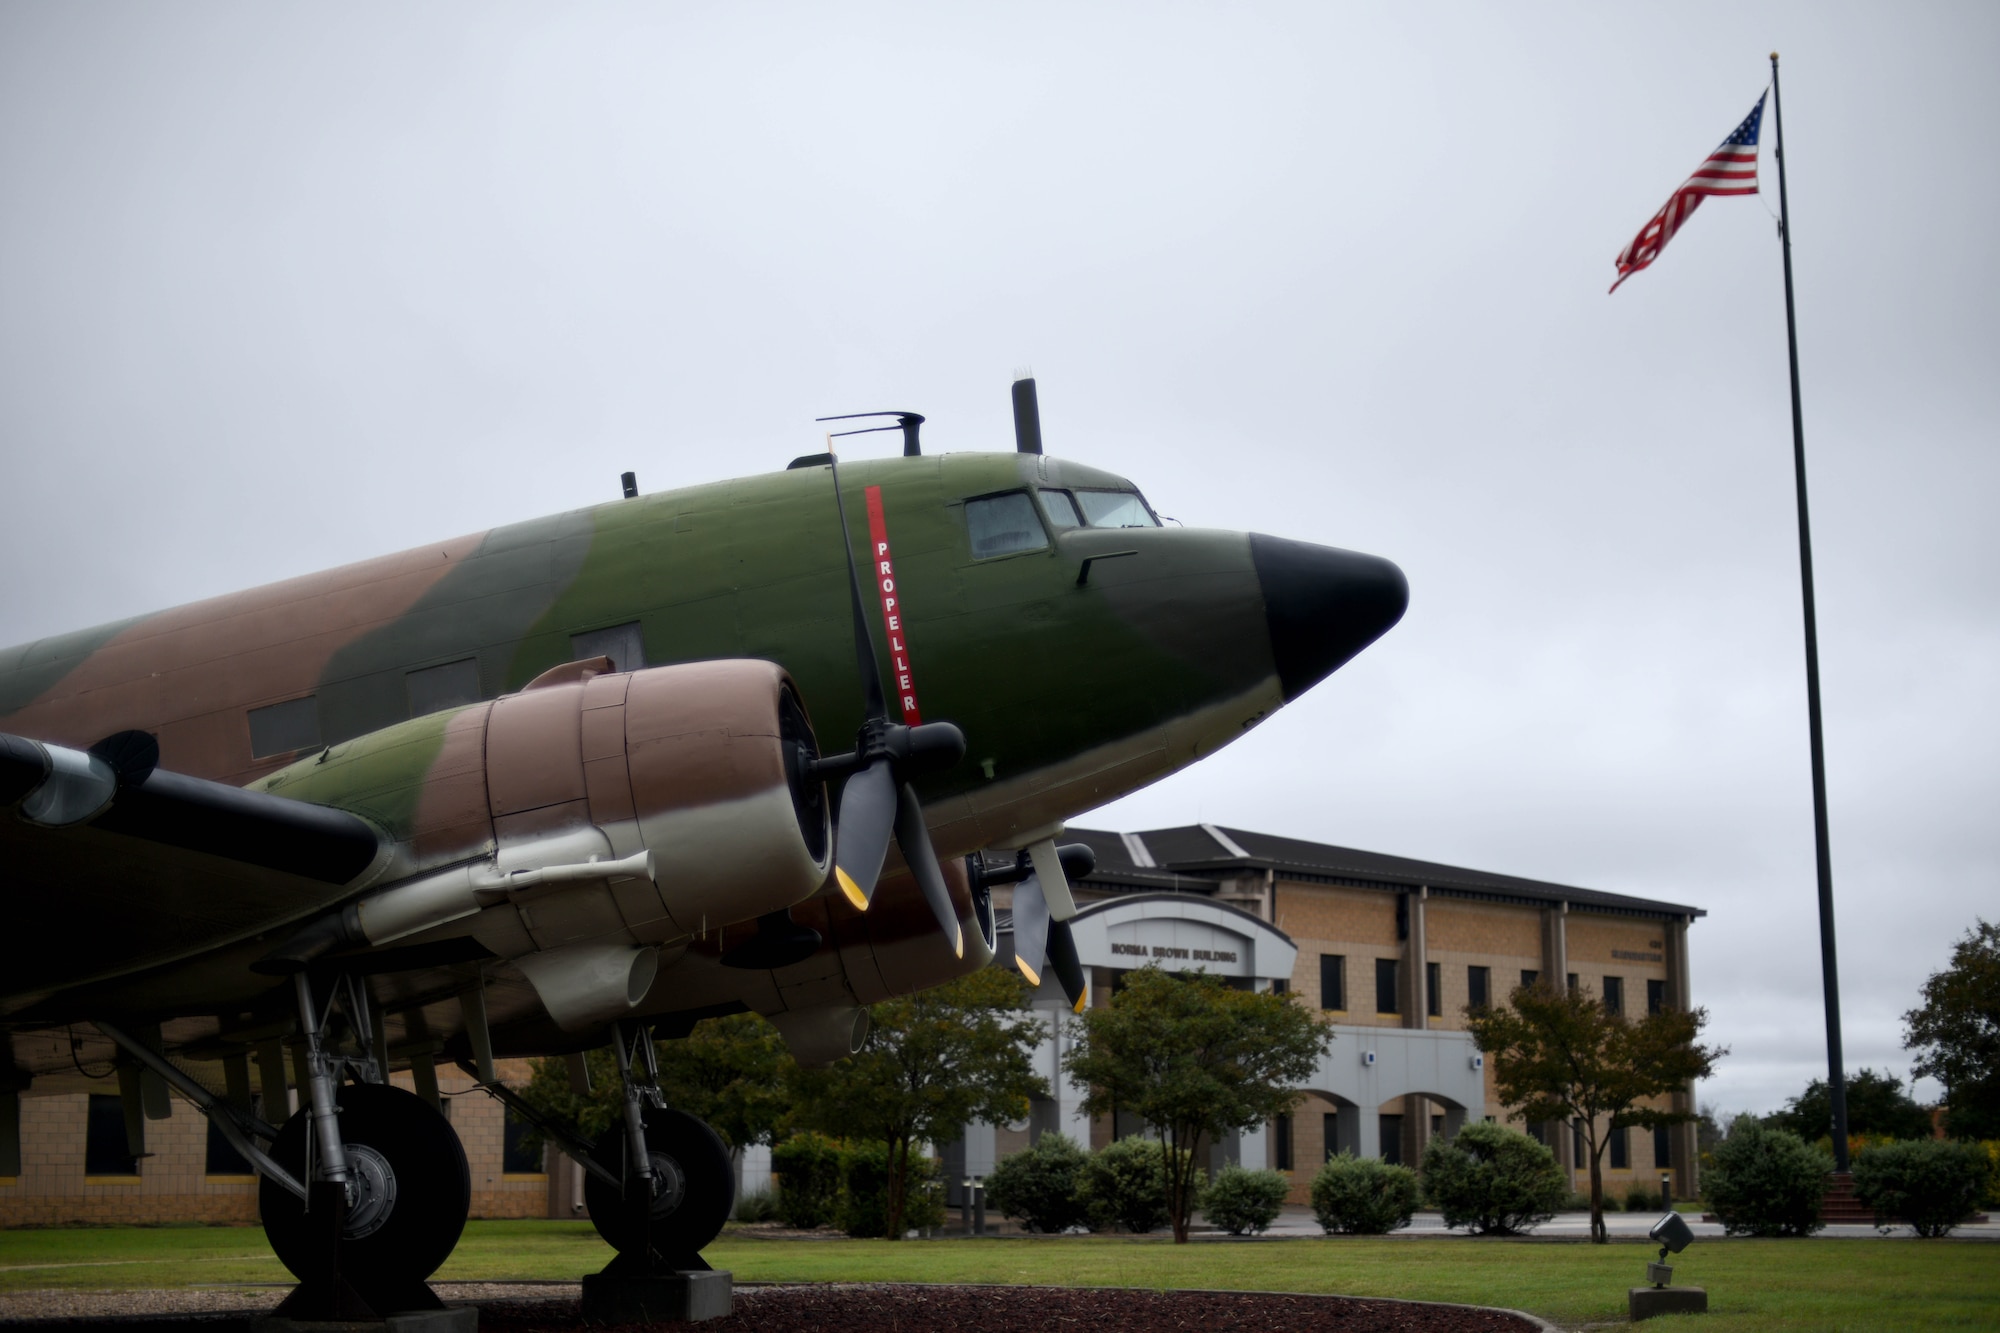 A C-47A modified to depict an EC-47Q on display near the Norma Brown building on Goodfellow Air Force Base, Texas, Oct. 24, 2018. U.S. Air Force Tech. Sgt. Raymond Leftwich flew and died in an EC-47 during the Vietnam War. (U.S. Air Force photo by Senior Airman Randall Moose/Released)